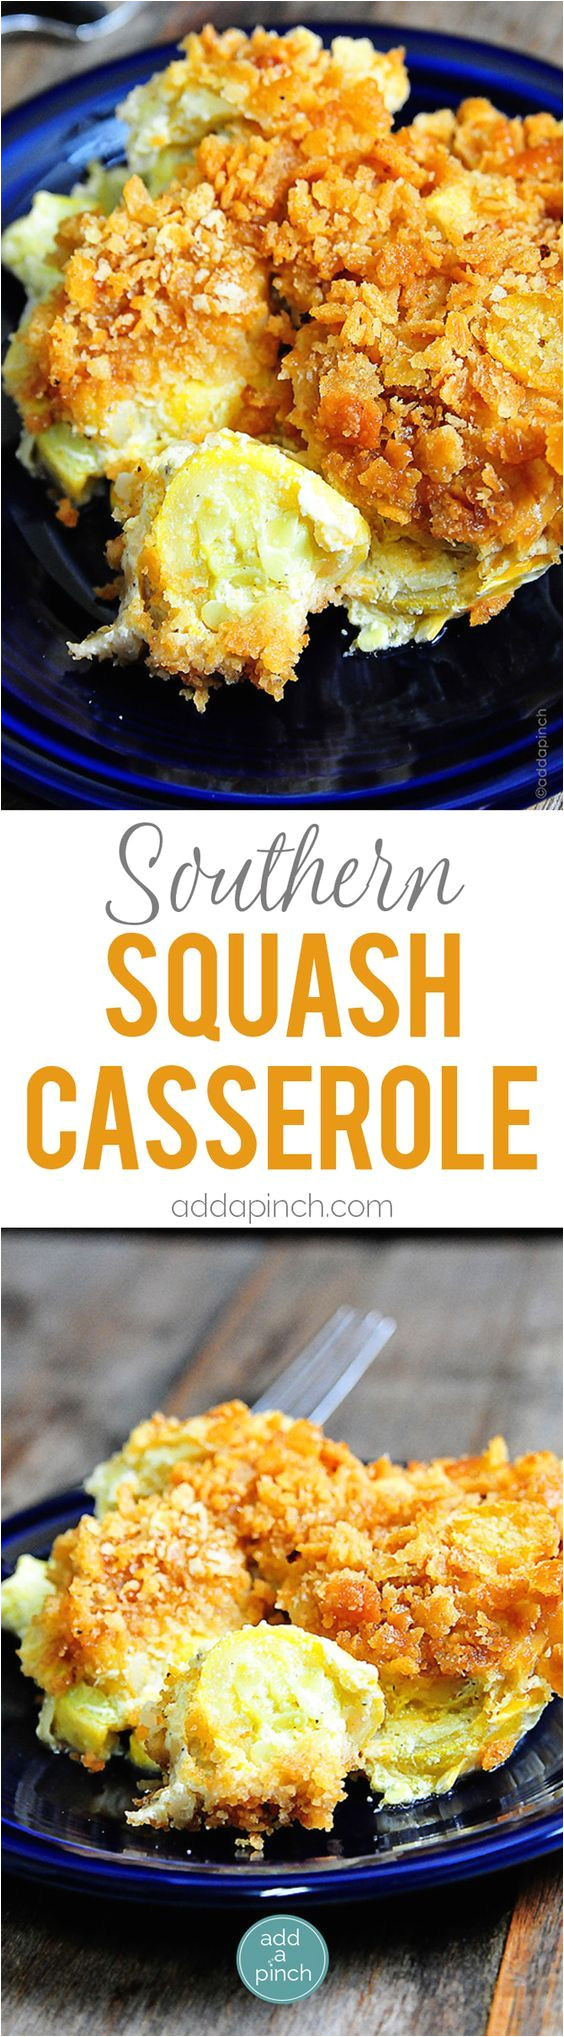 squash casserole southern squash casserole squash casserole is an essential dish for holidays and special events topped with a buttery cracker topping